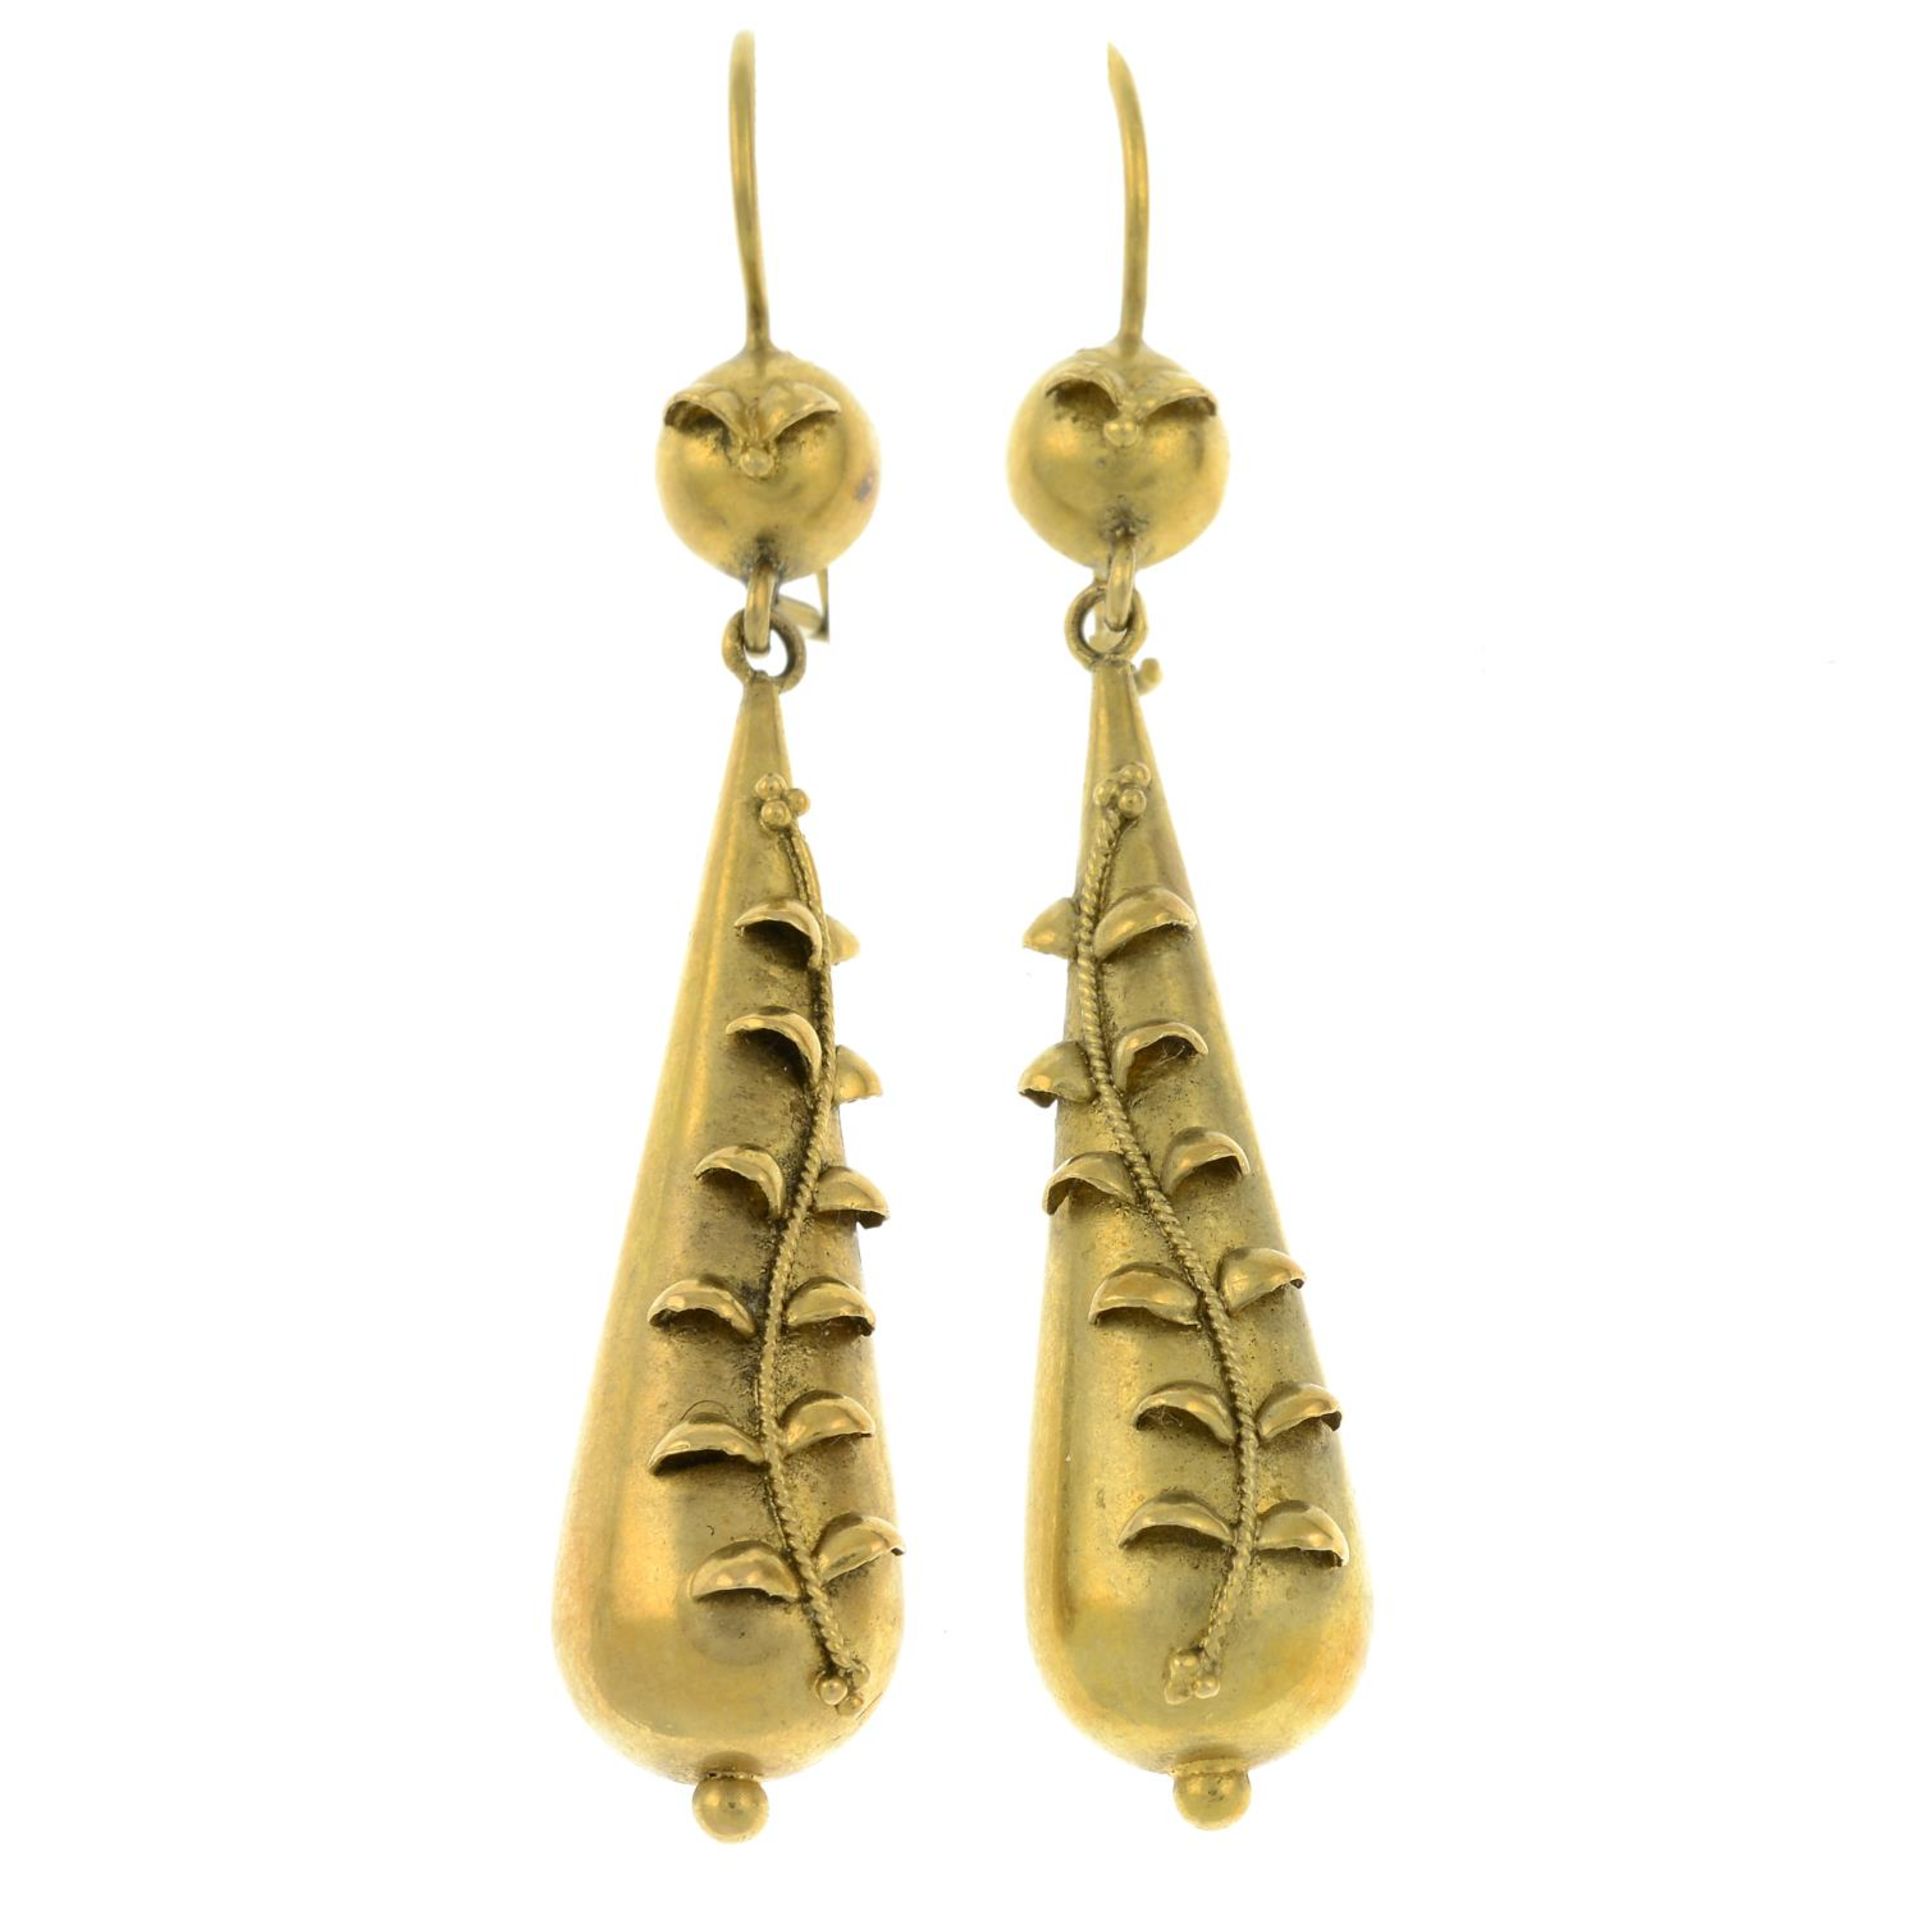 A pair of late 19th century 15ct gold drop earrings.Stamped 15ct.Length 5.1cms.